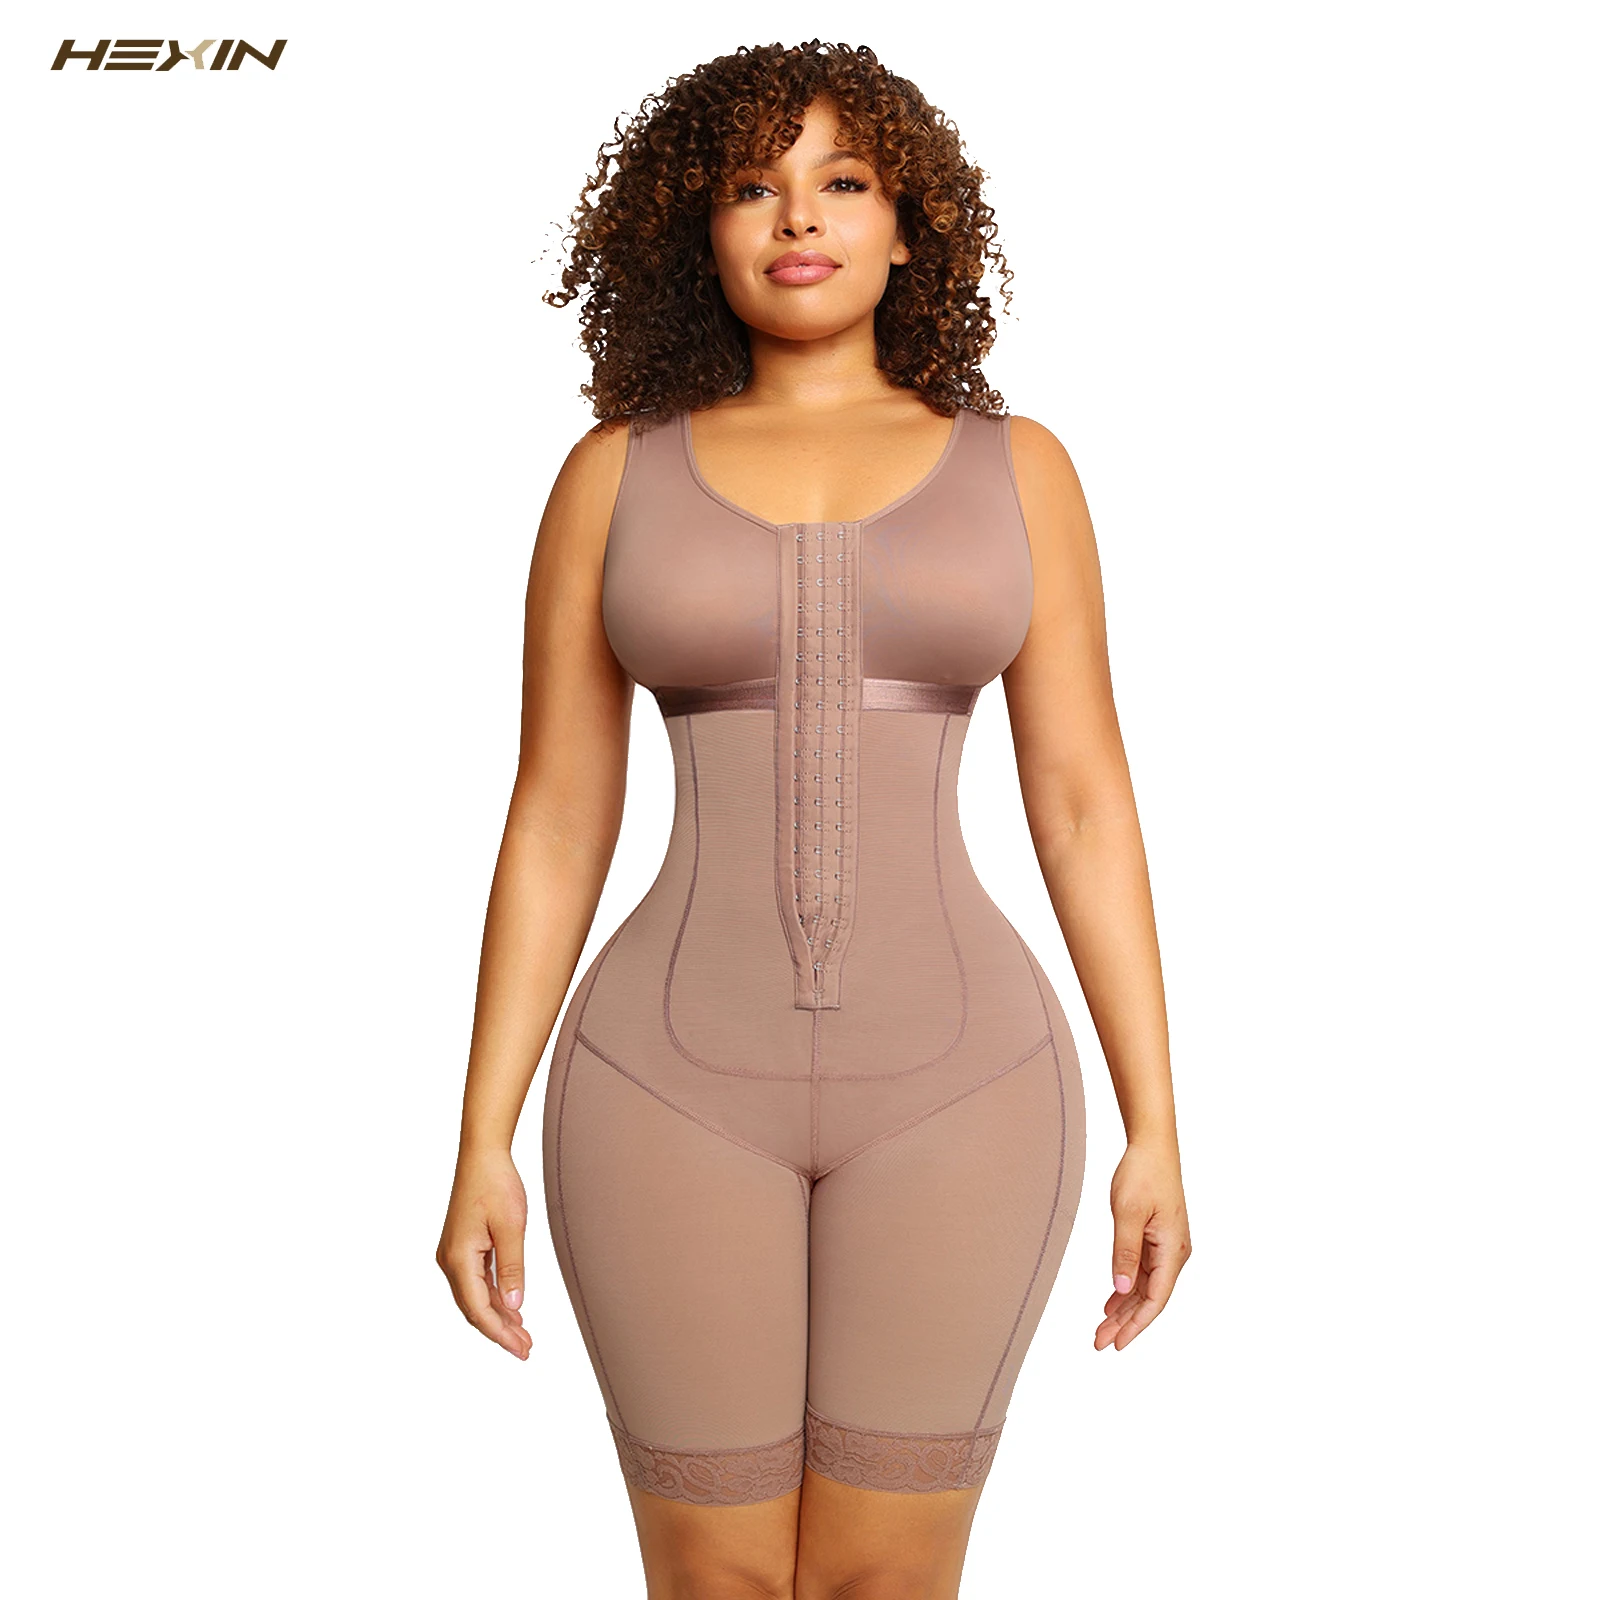 Fajas Colombianas: Transform Your Look with the Best Shapewear